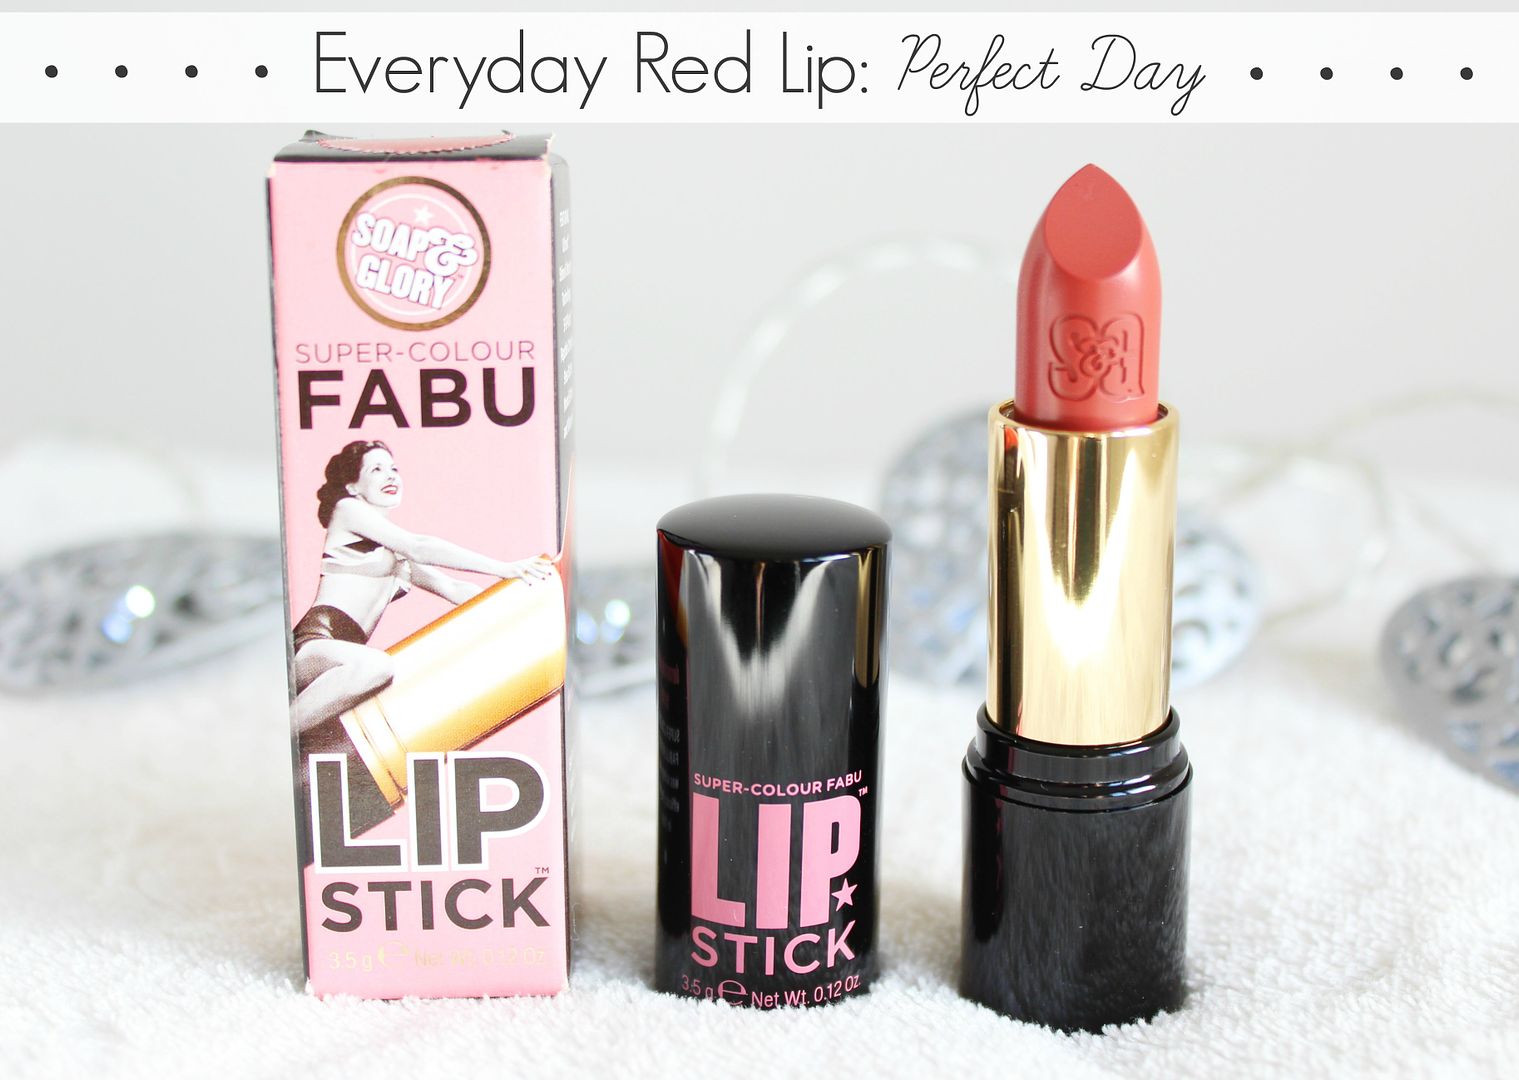 Every-Day-Red-Lip-Soap-And-Glory-Super-Colour-Fabu-Lipstick-Perfect-Day-Review-Belle-Amie-UK-Beauty-Fashion-Lifestyle-Blog